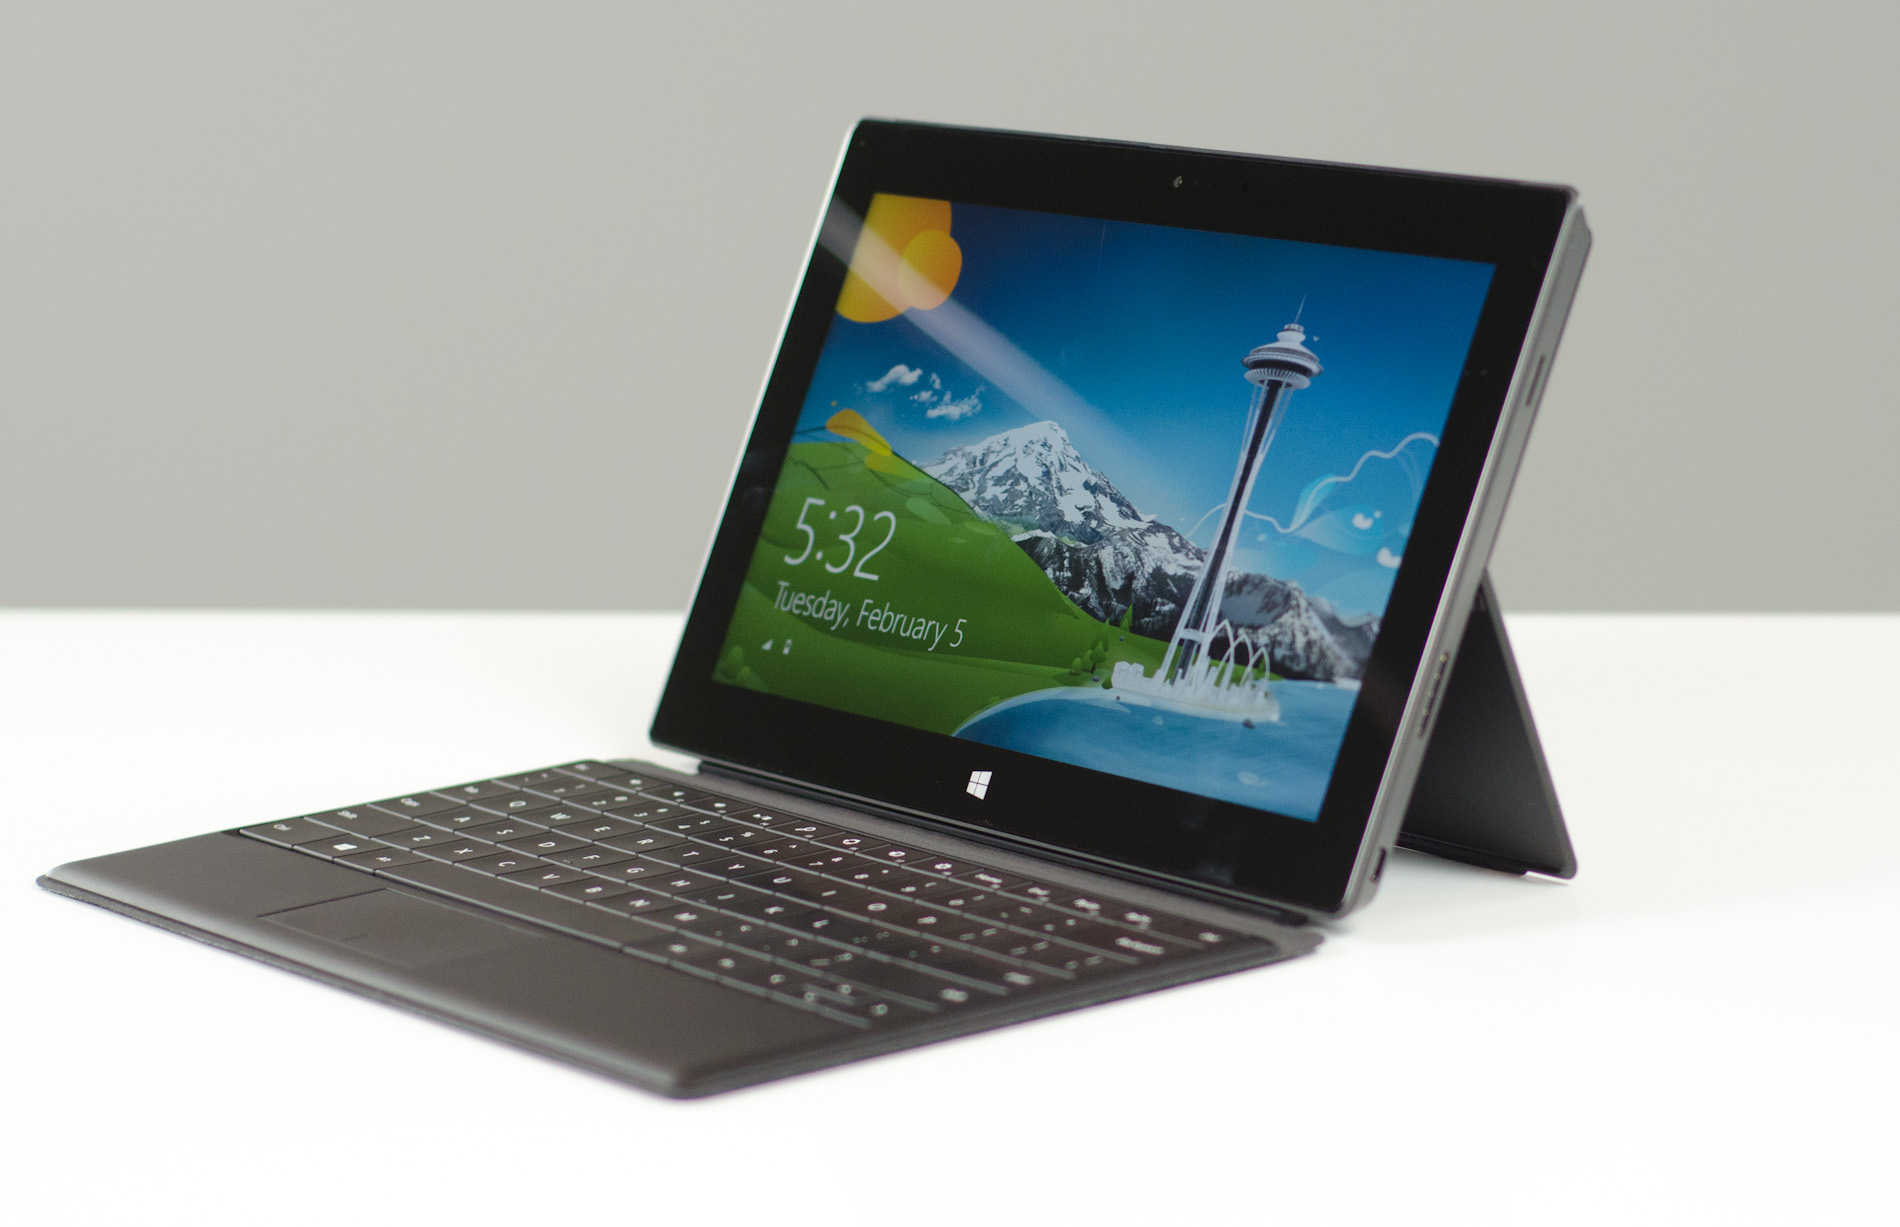 Wireless, Audio, Thermals, and Surface History - The Microsoft 